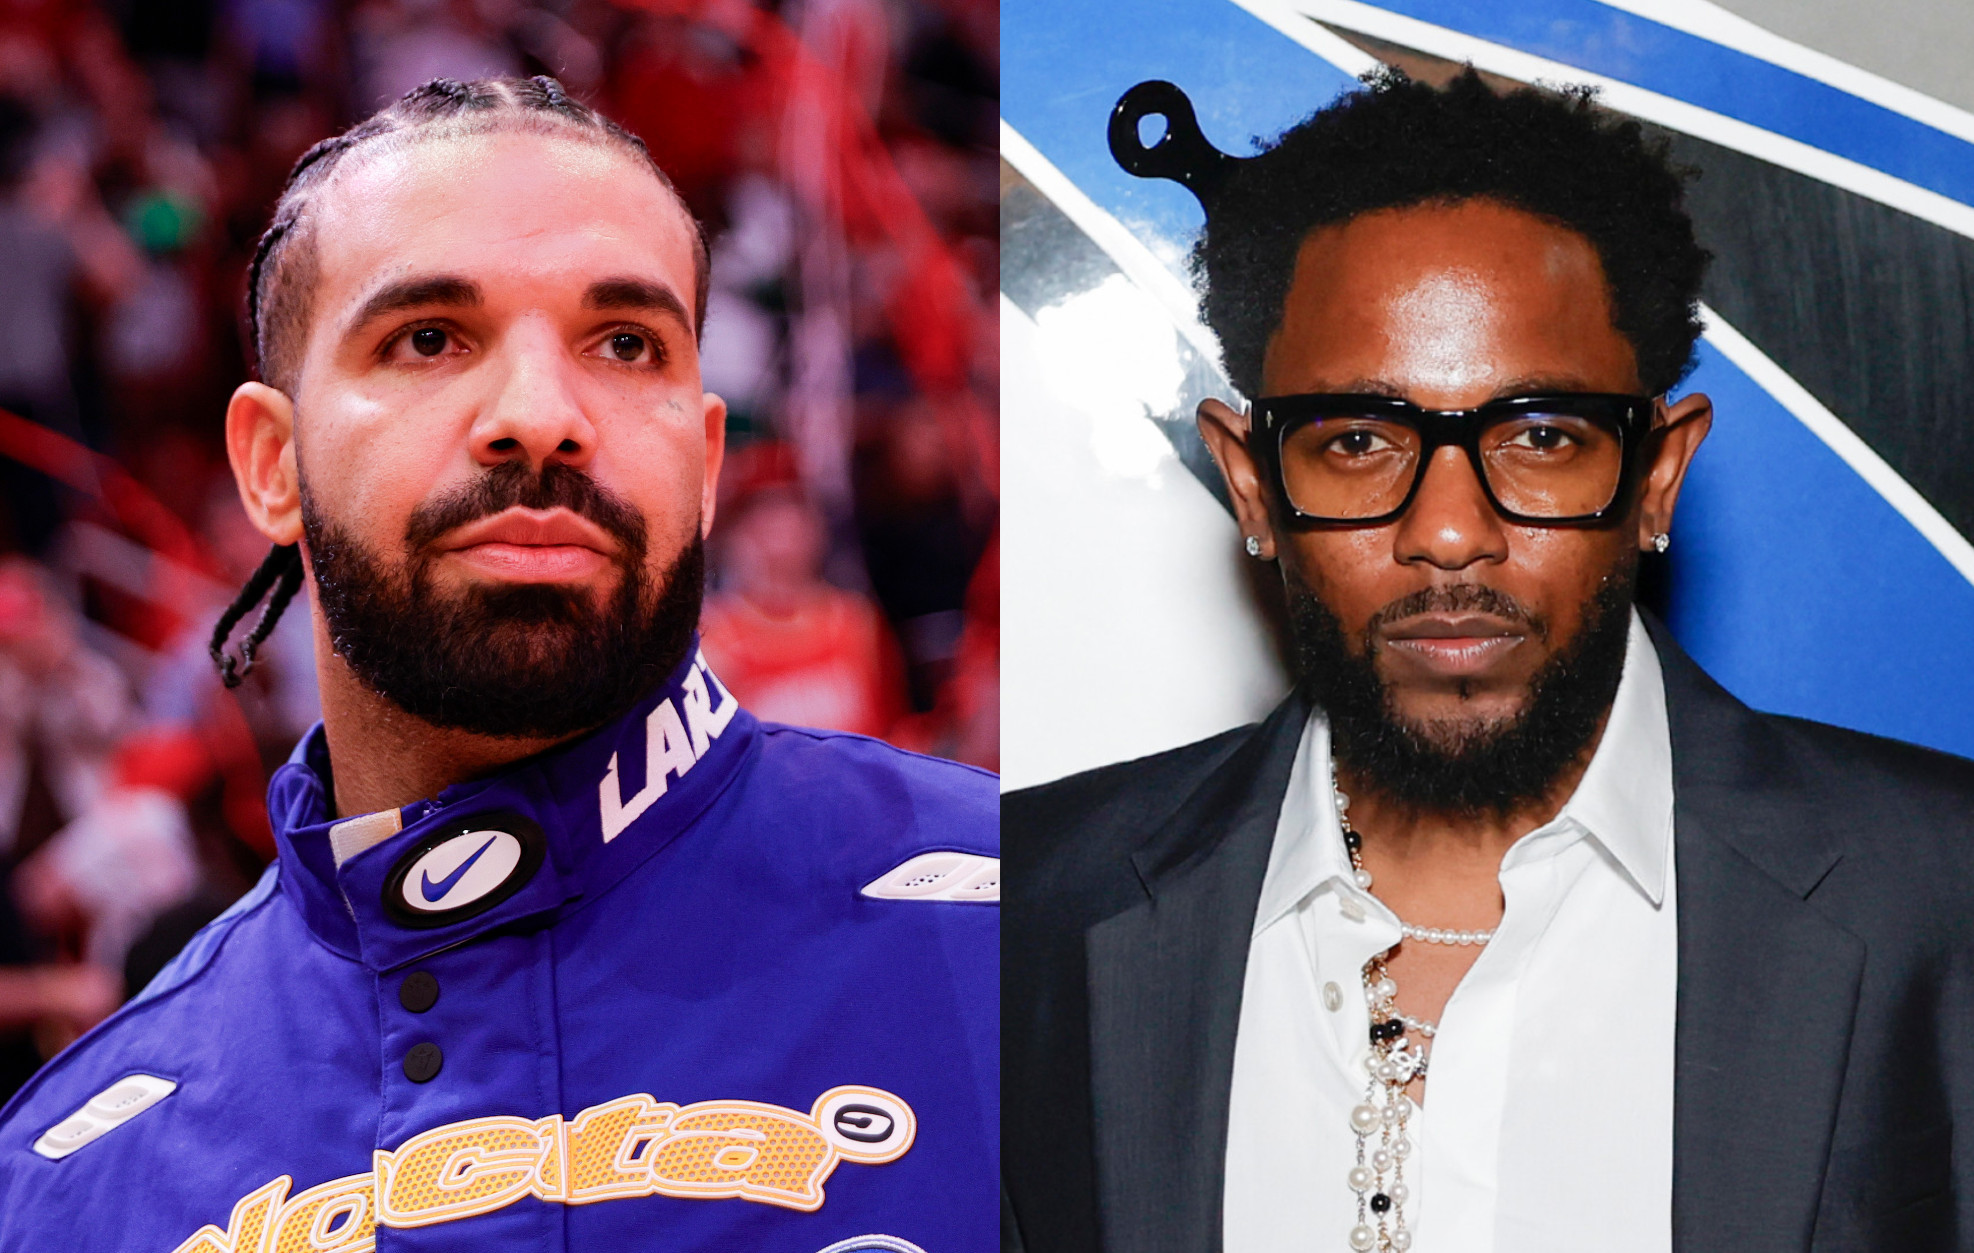 Drake taunts Kendrick Lamar, says he “has nothing to drop” in response to ‘Push Ups’ diss track